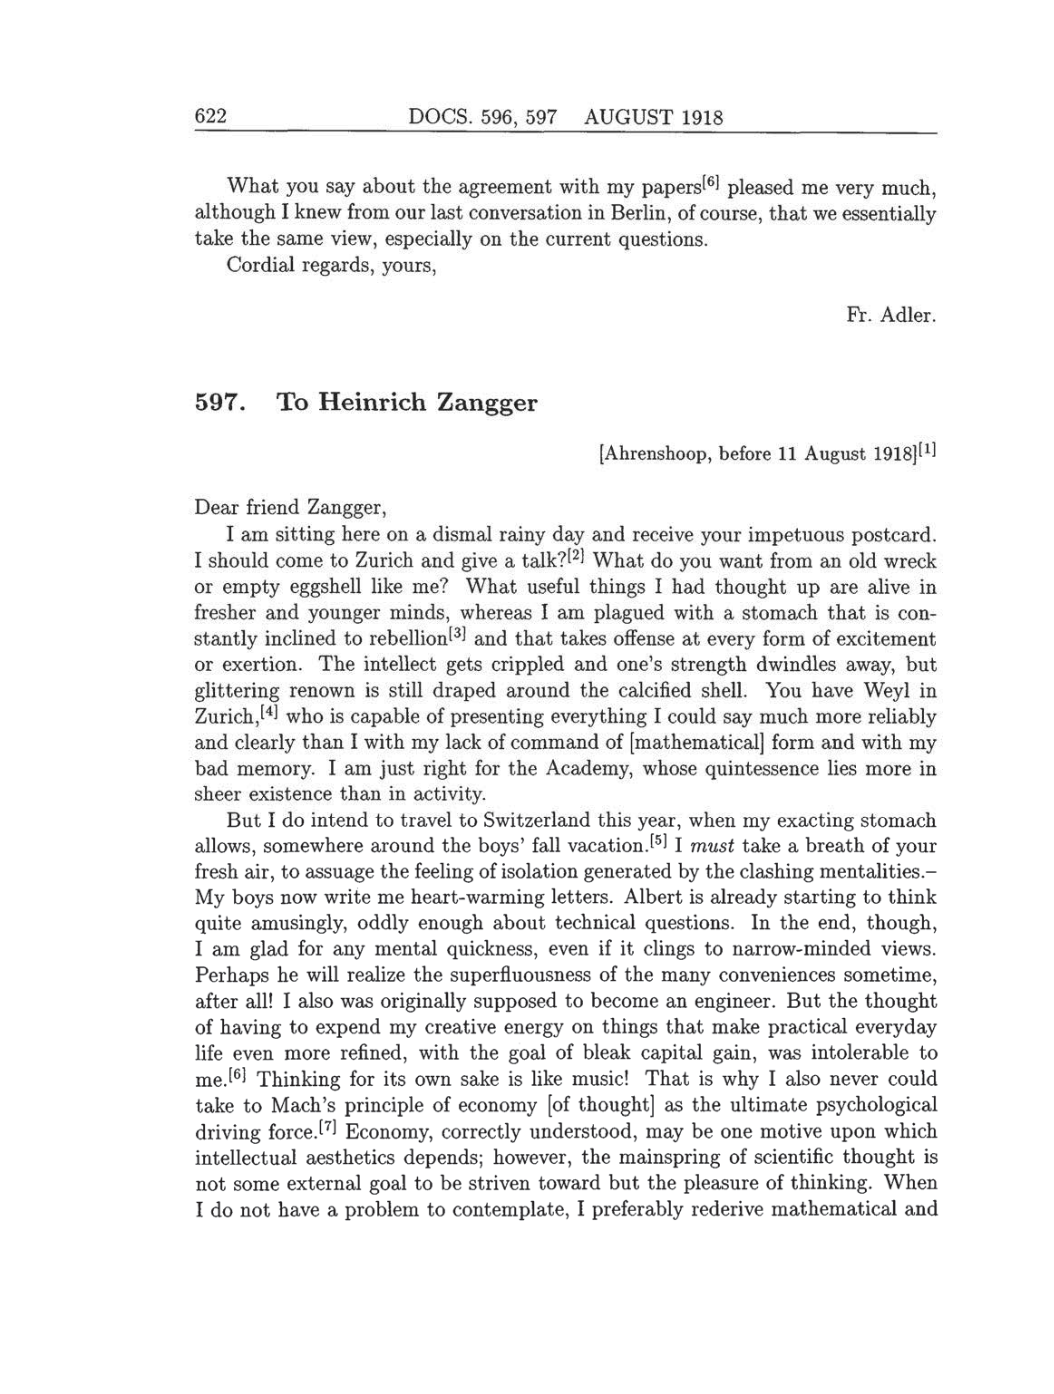 Volume 8: The Berlin Years: Correspondence, 1914-1918 (English translation supplement) page 622